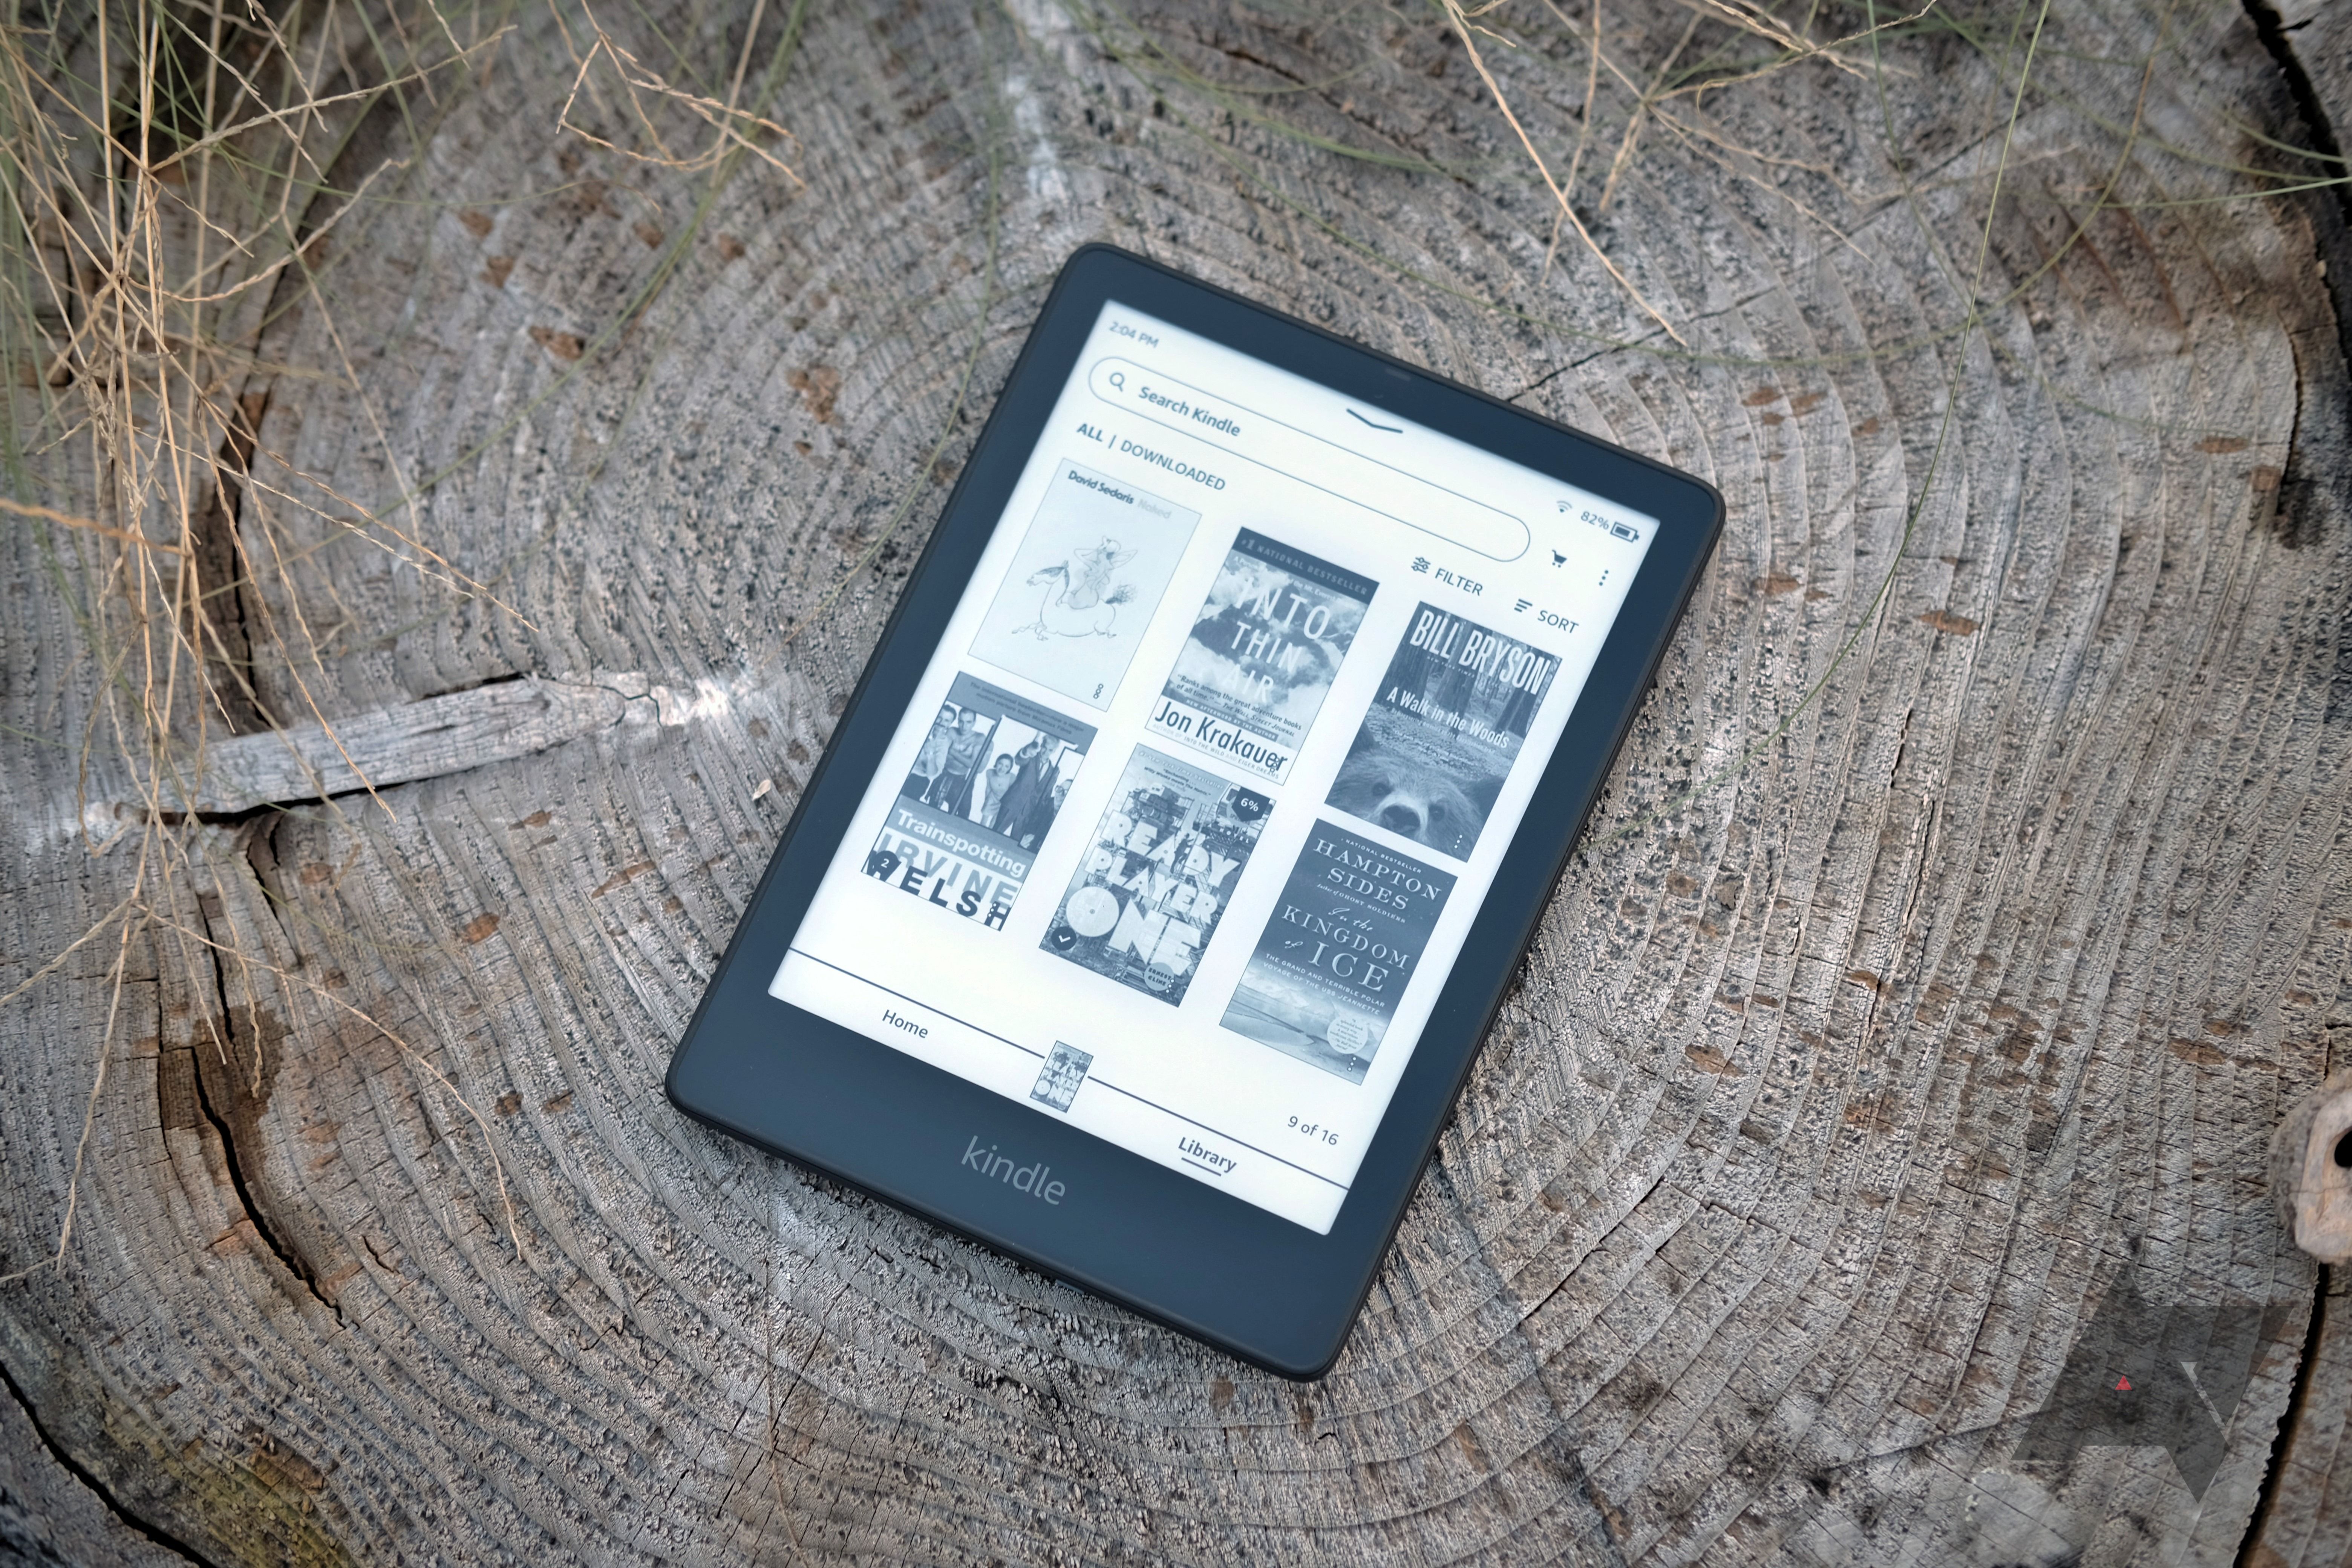 Kindle Paperwhite Signature Edition sitting on a wood surface